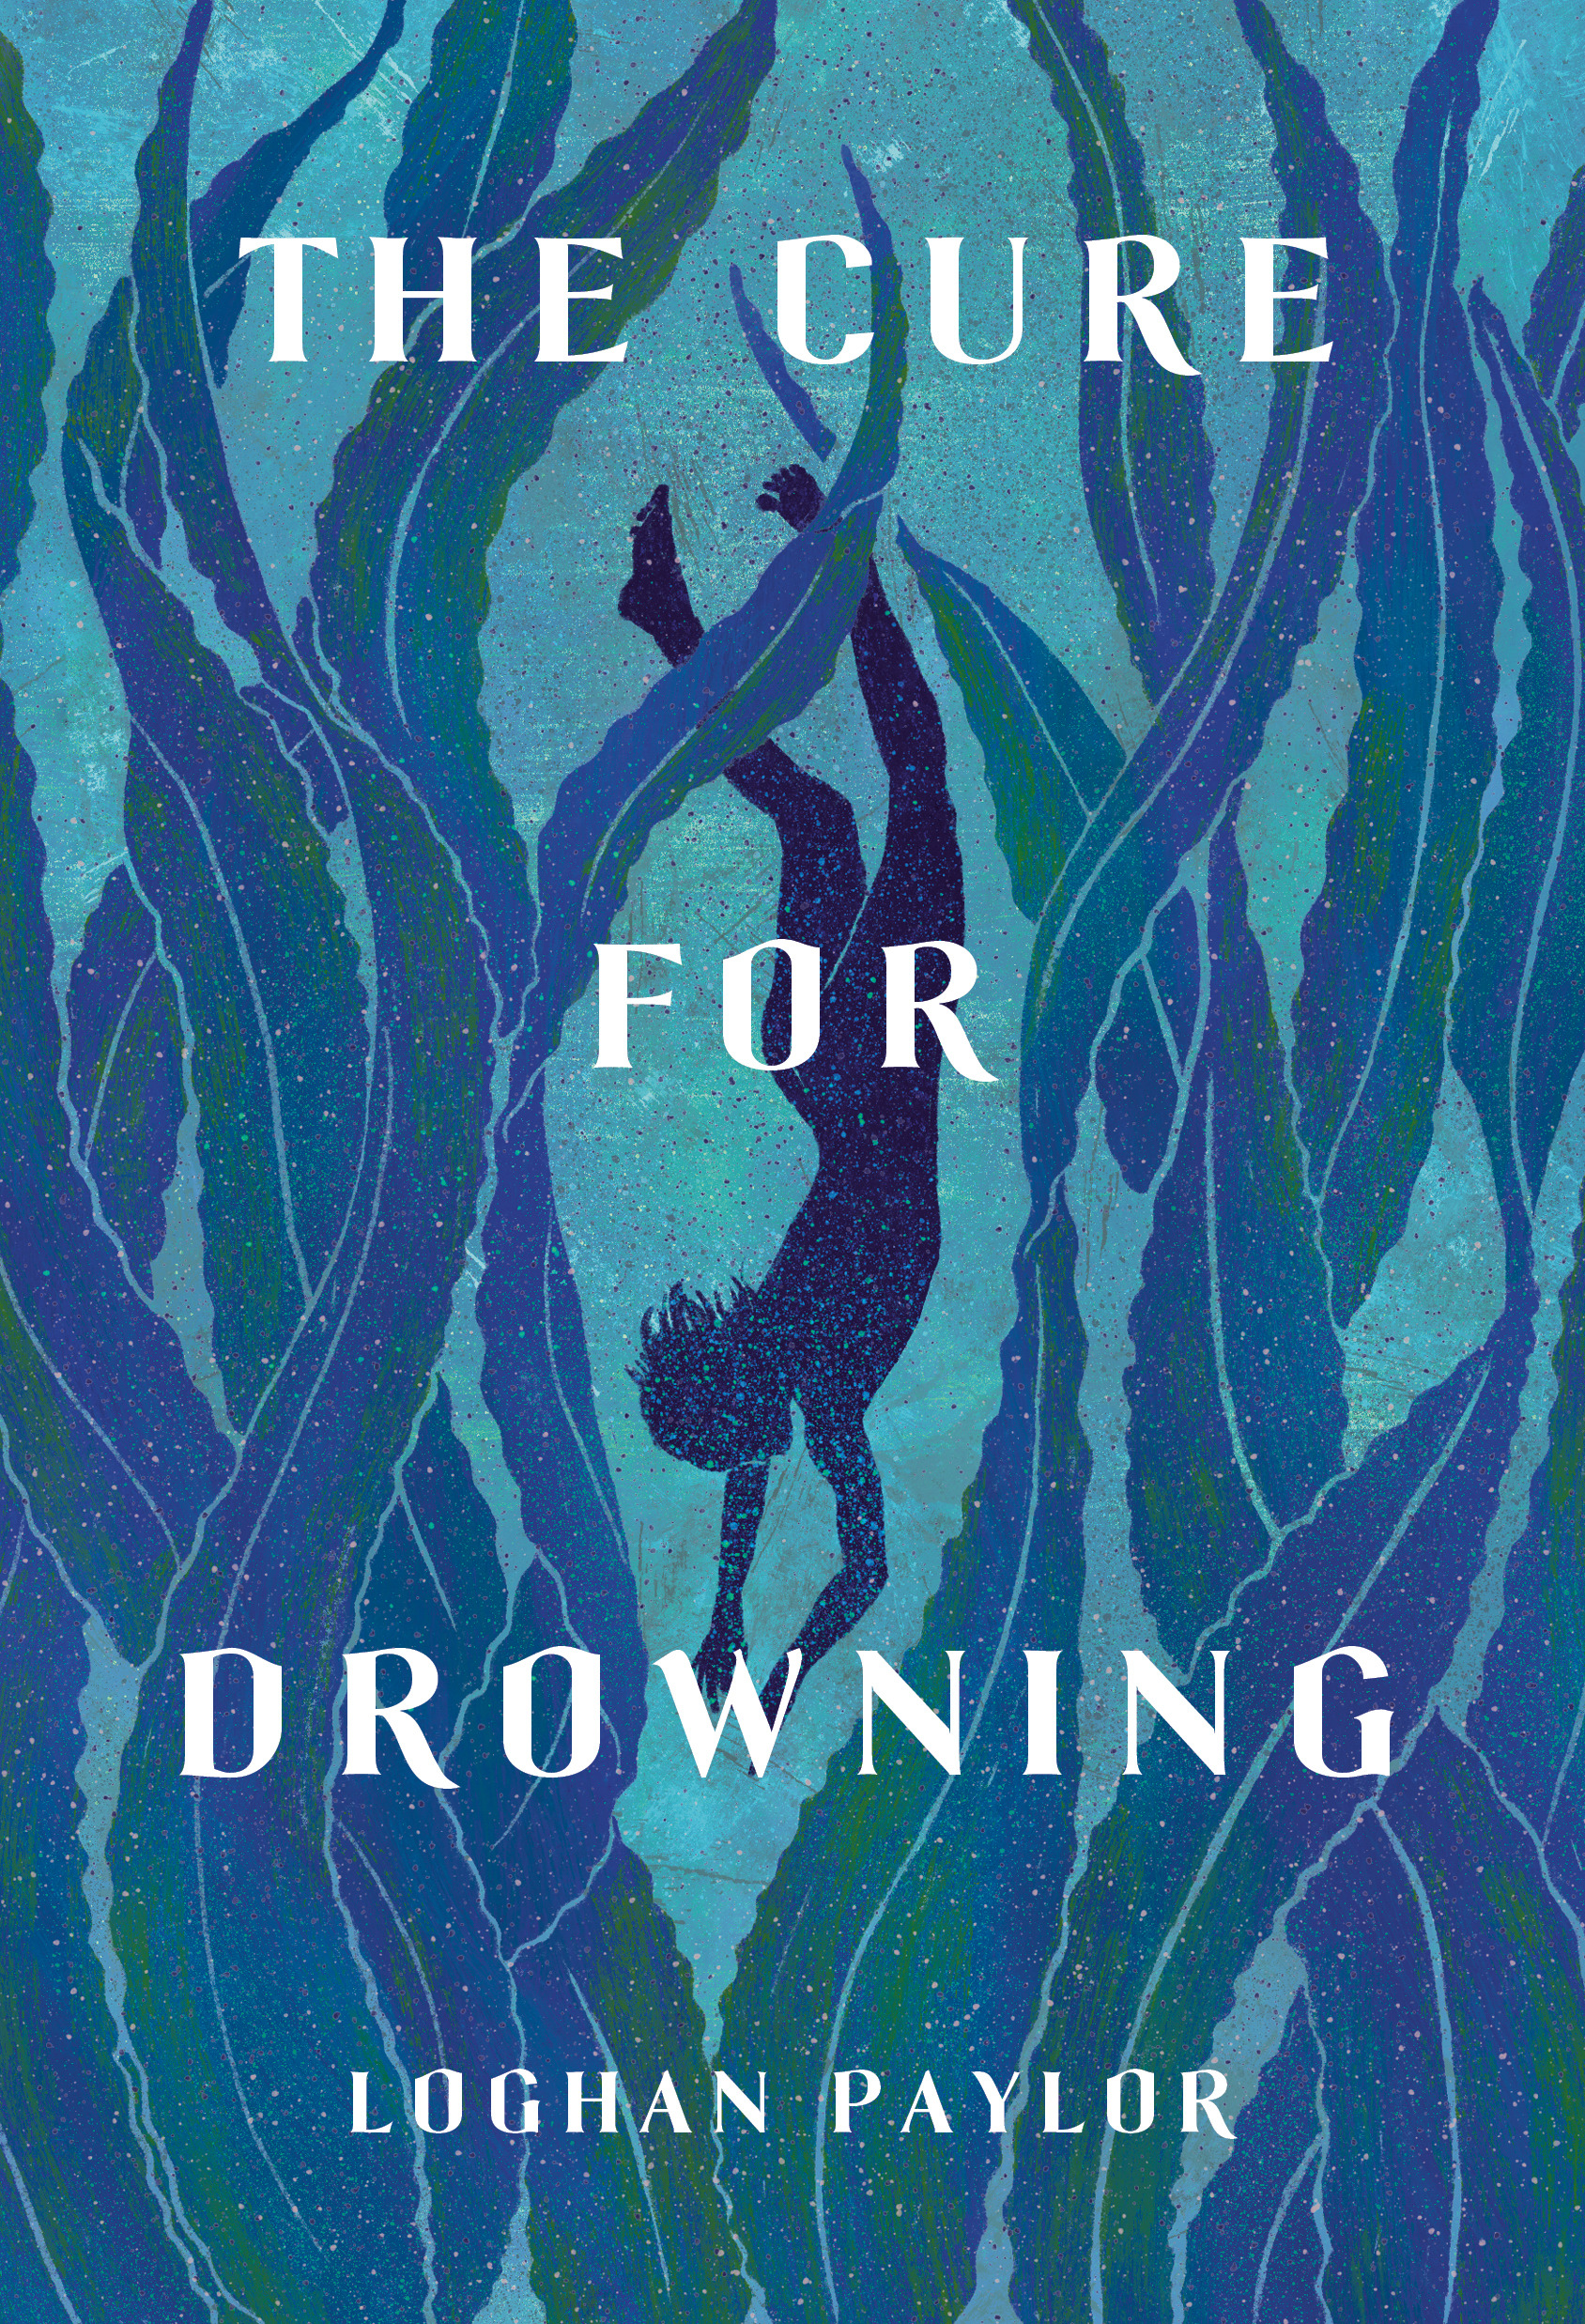 The Cure for Drowning by Loghan Paylor